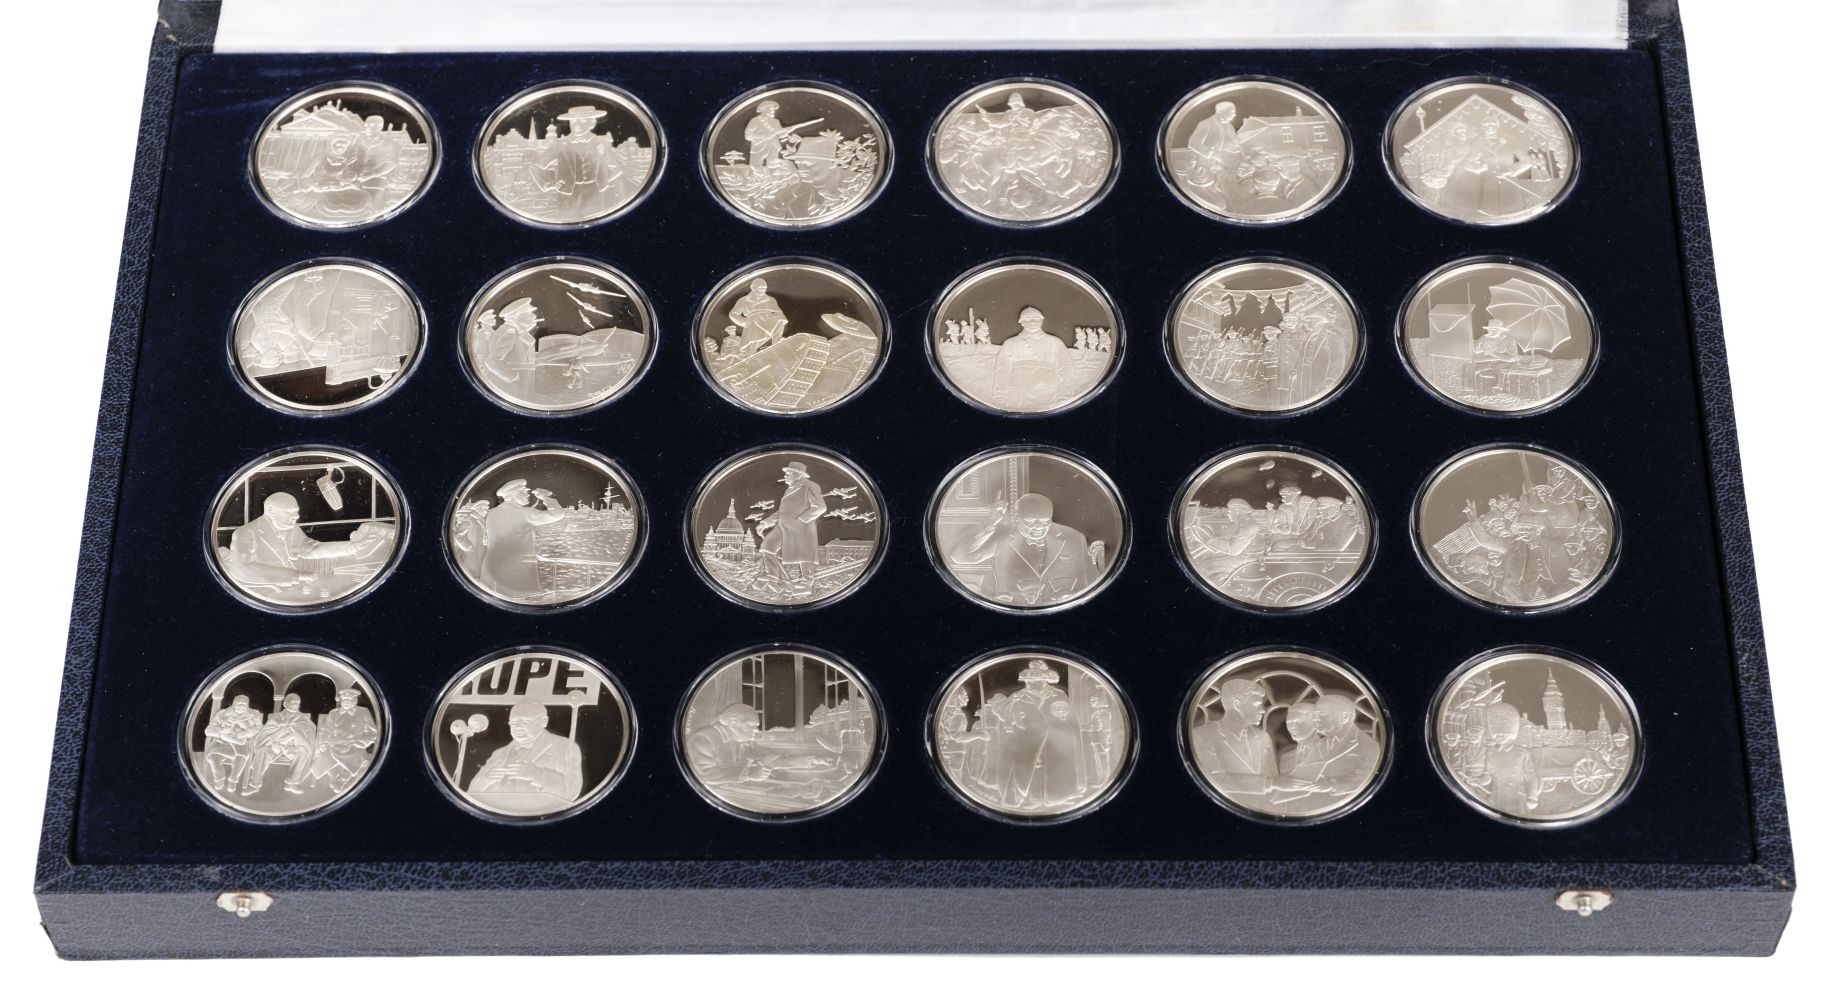 Proof Medals. The Winston Churchill Silver Medal Collection